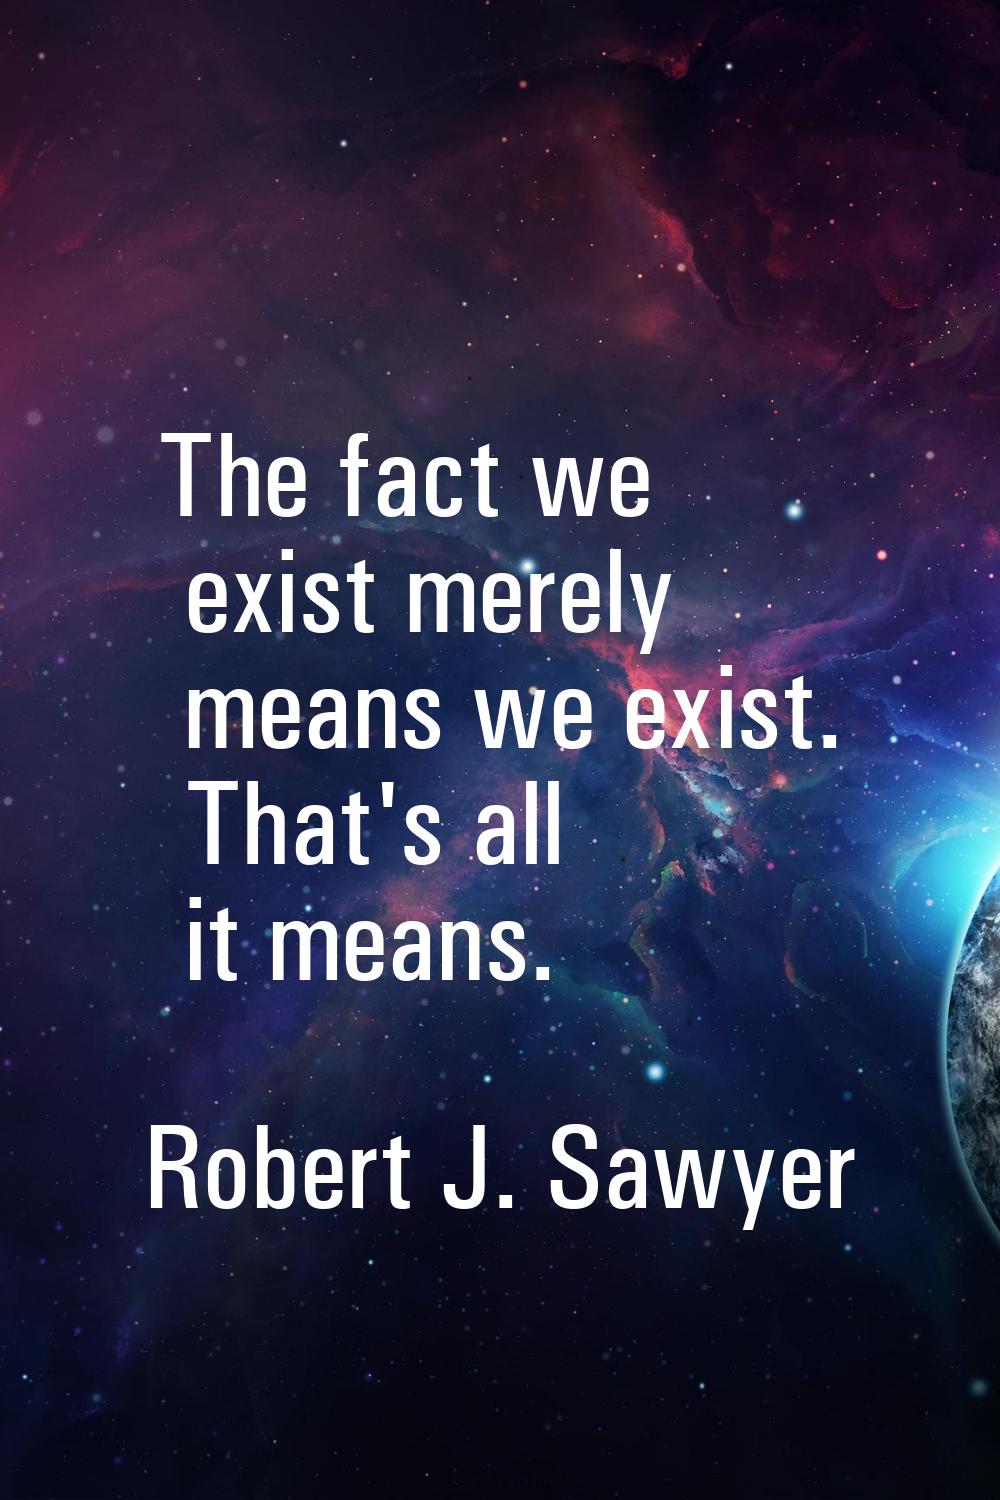 The fact we exist merely means we exist. That's all it means.